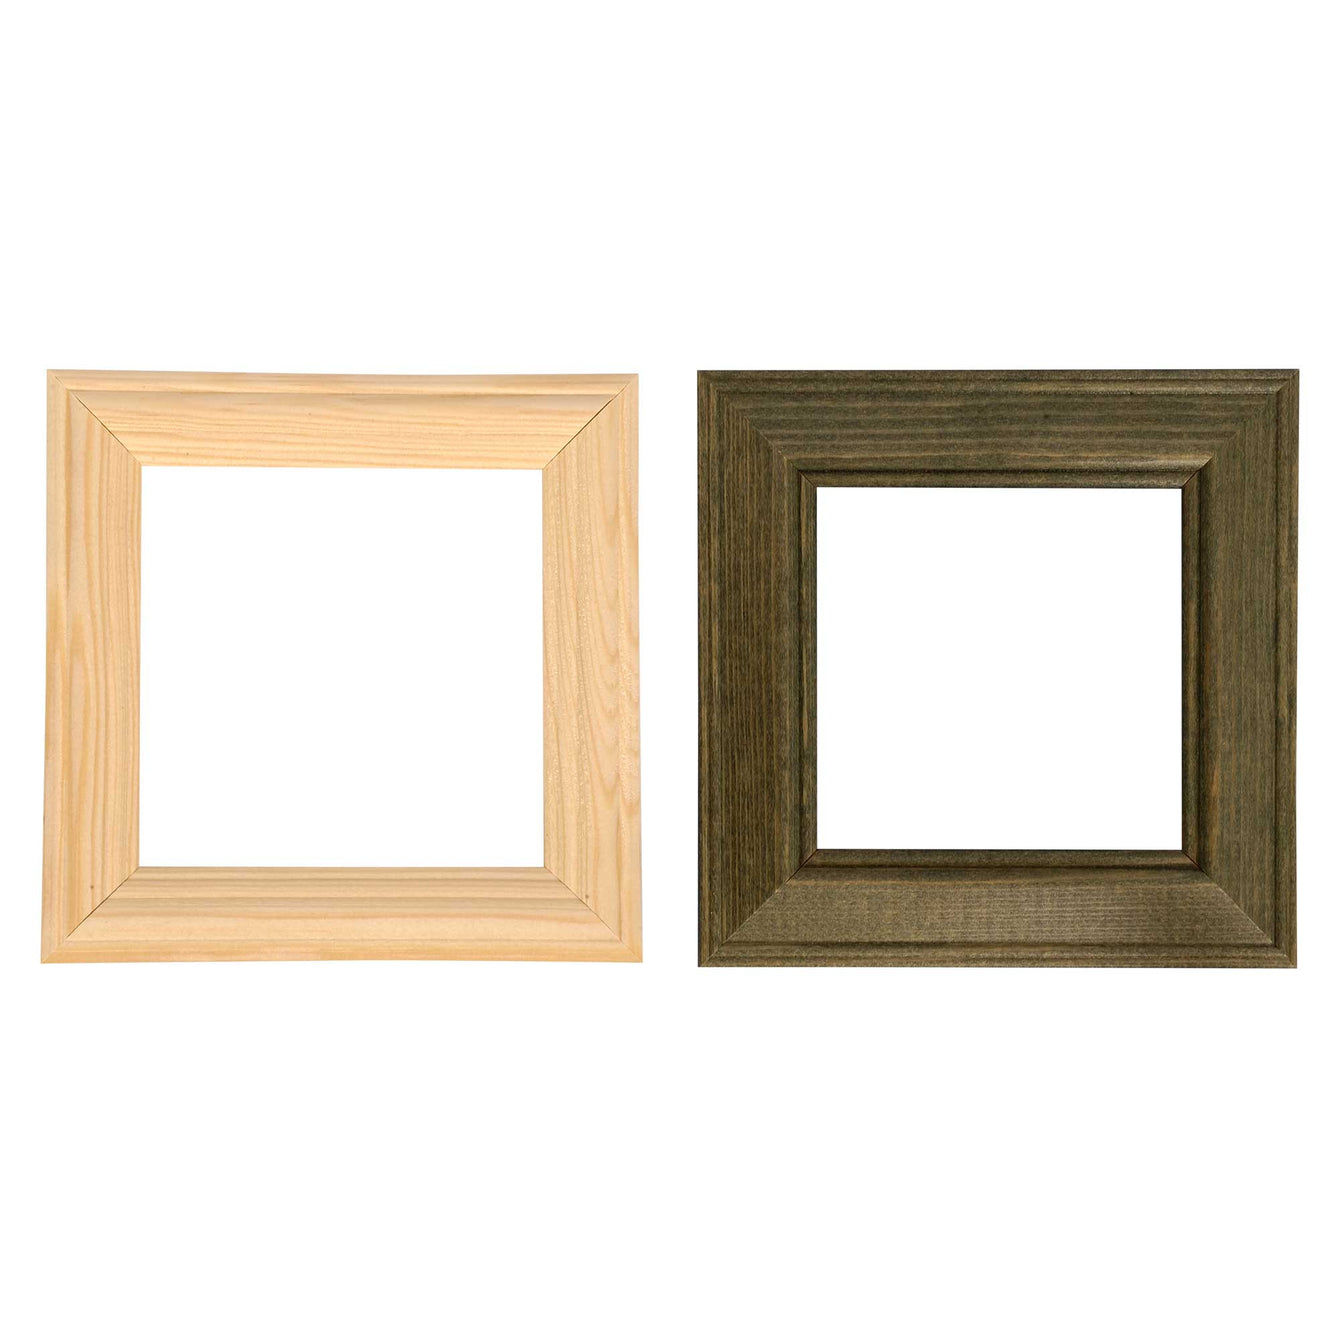 ElekTek Switch Surround Ovolo Frame Cover Finger Plate Pine Shades Unfinished Pine